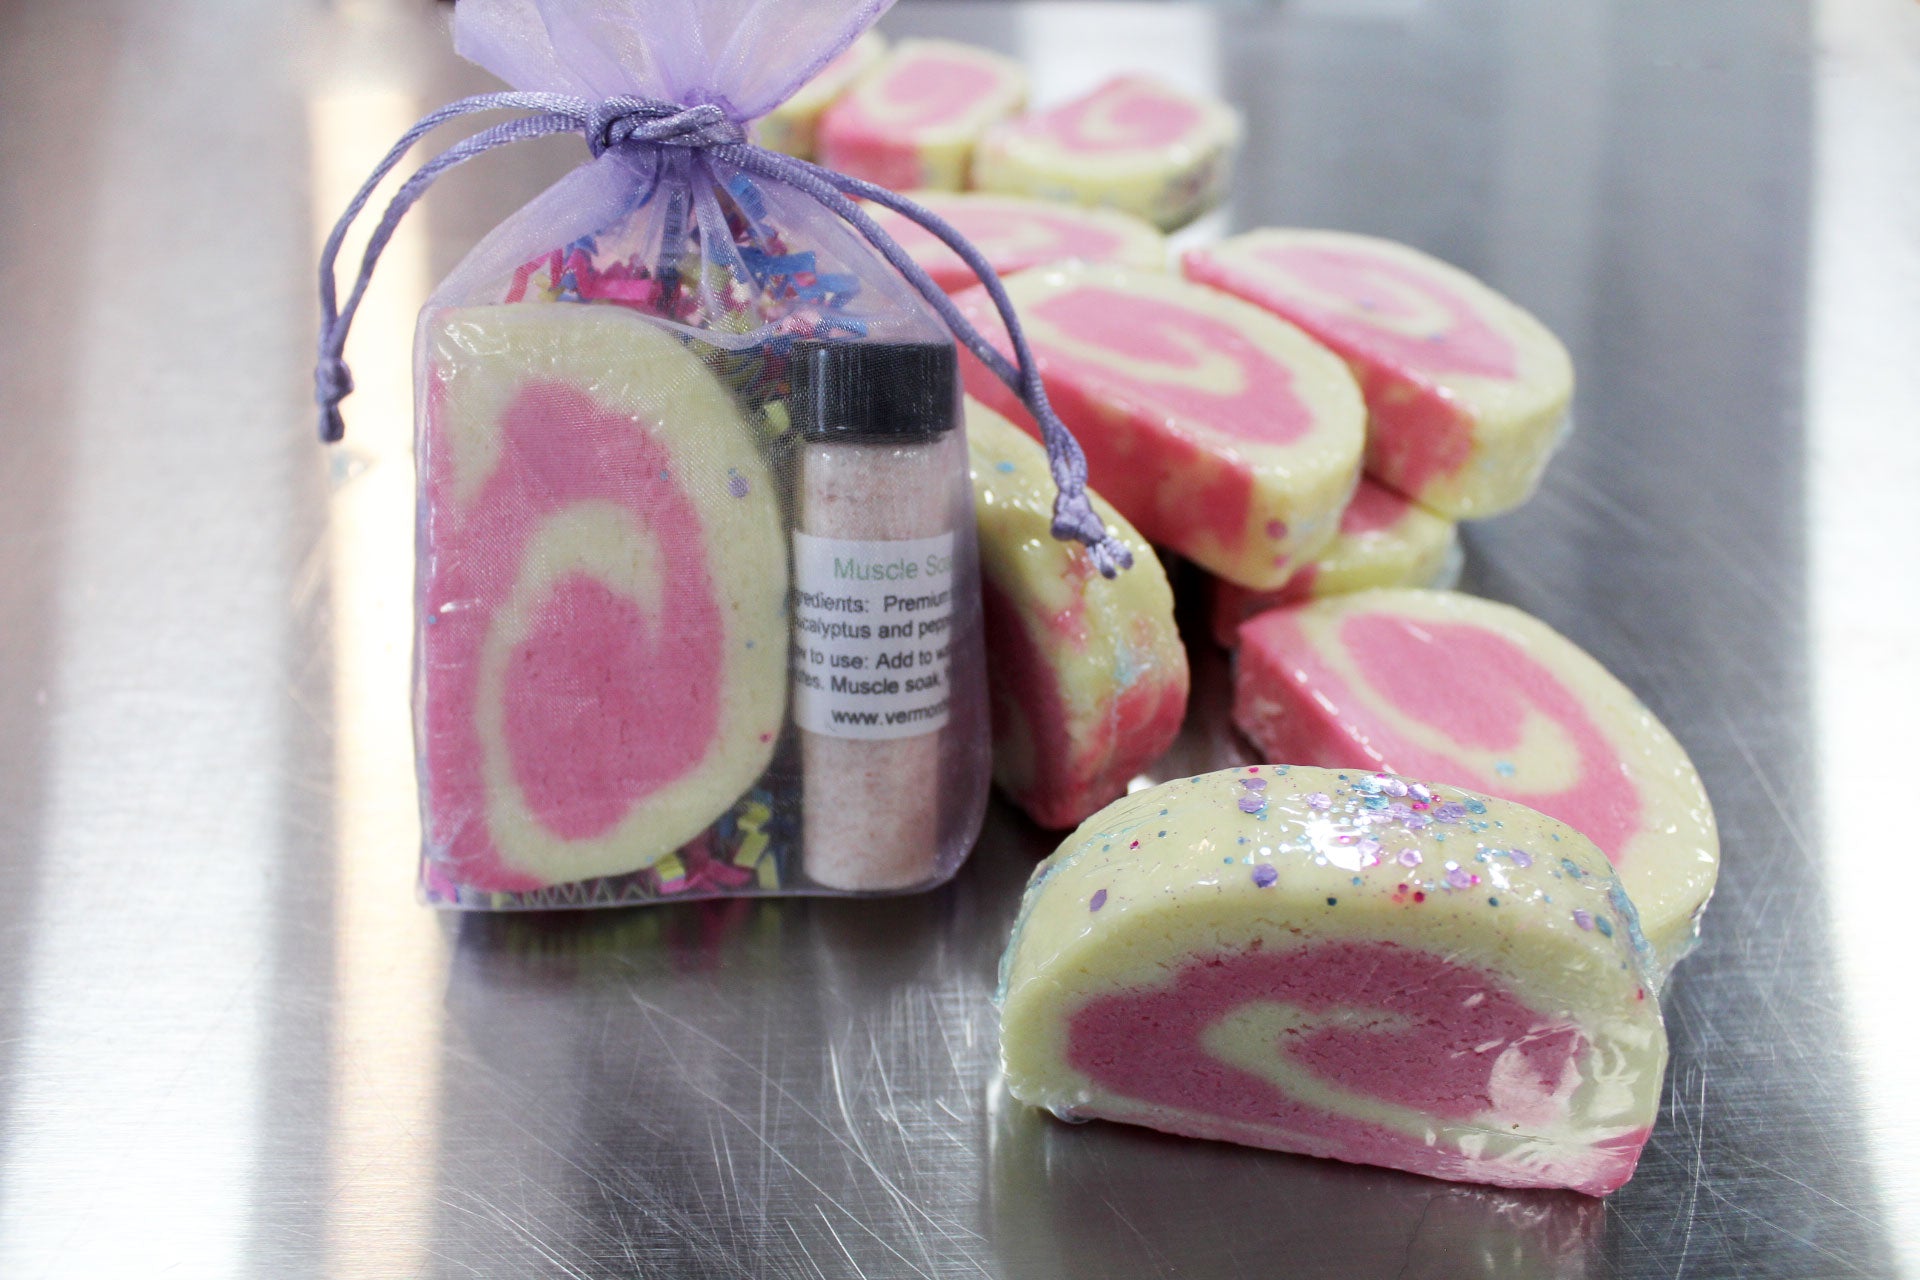 Raspberry jam solid bubble bar jelly roll style with muscle soaking bath salts in organza purple bag